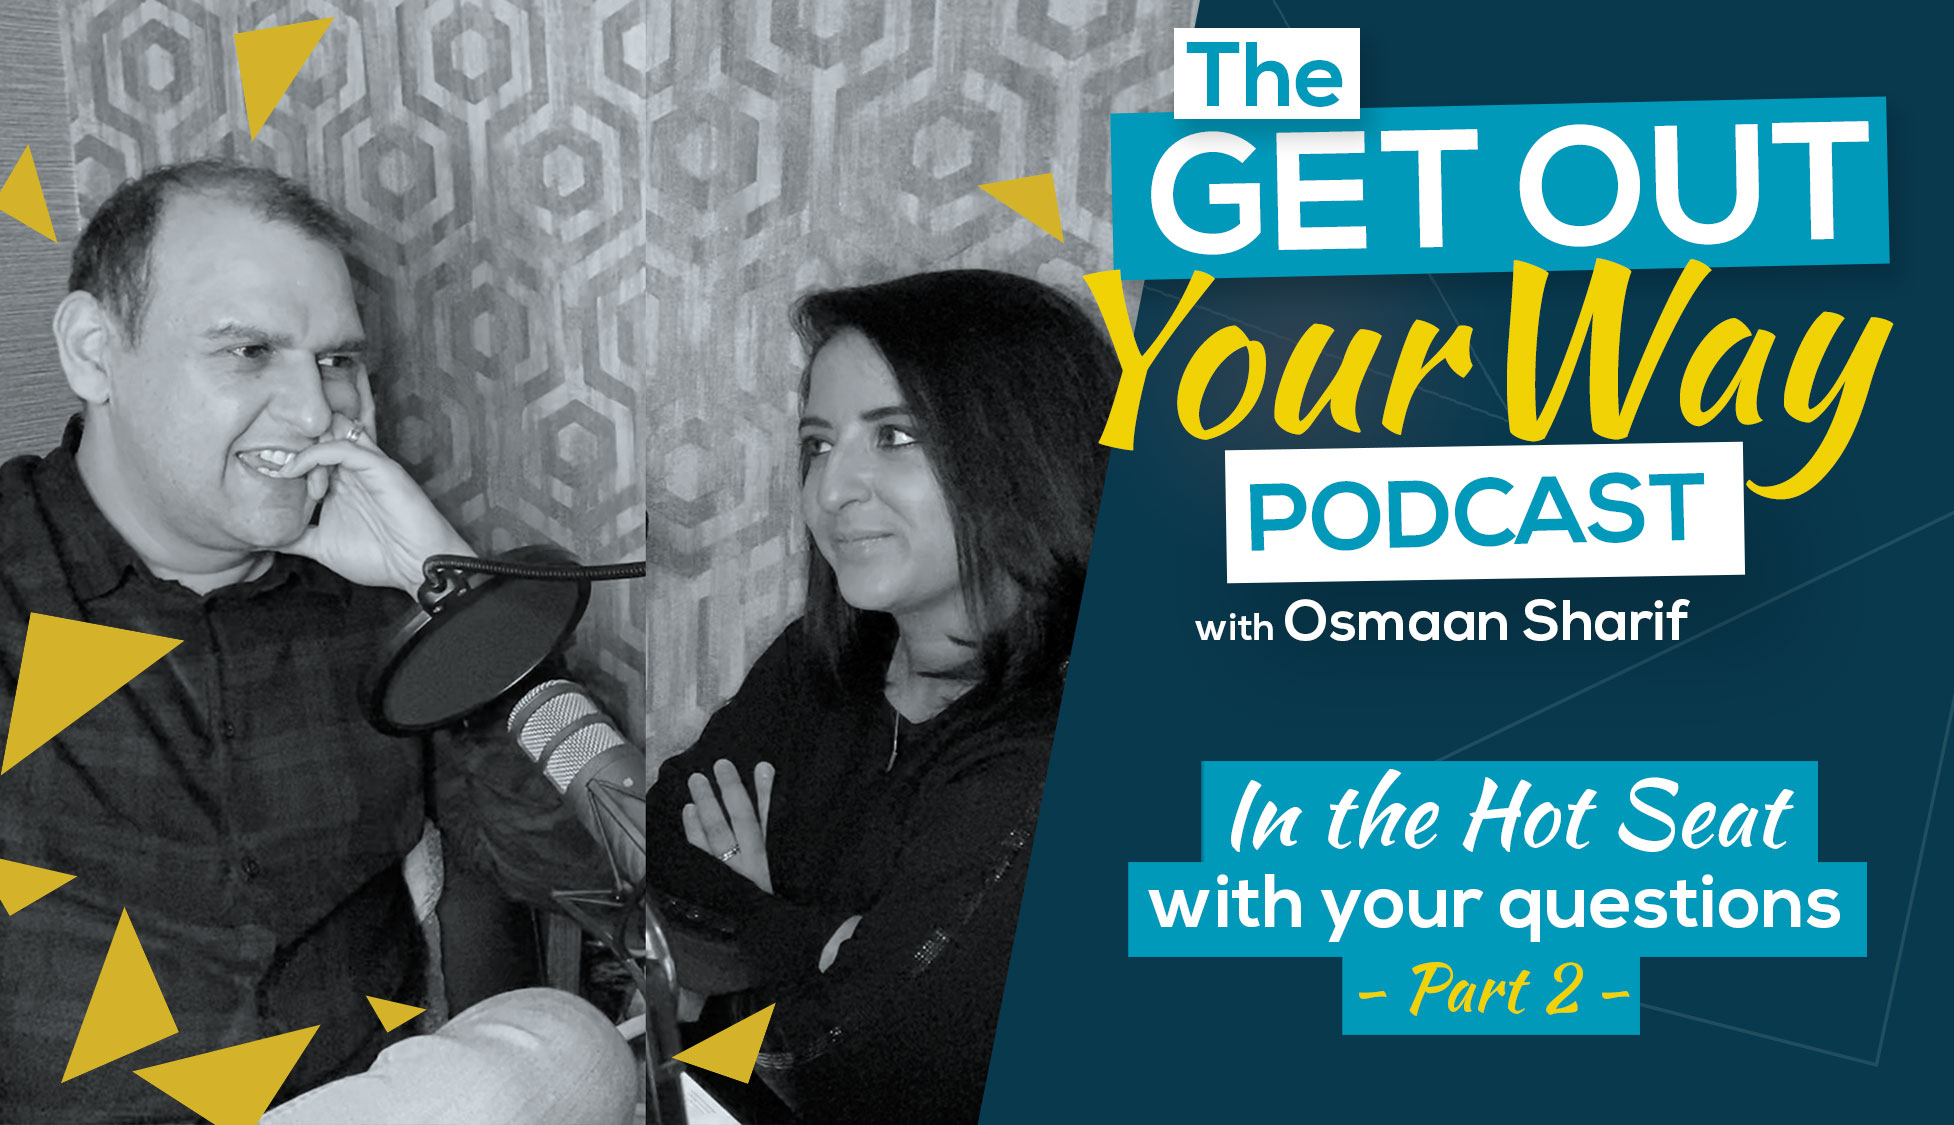 Episode 101 – In the Hot Seat with Your Questions Part 2